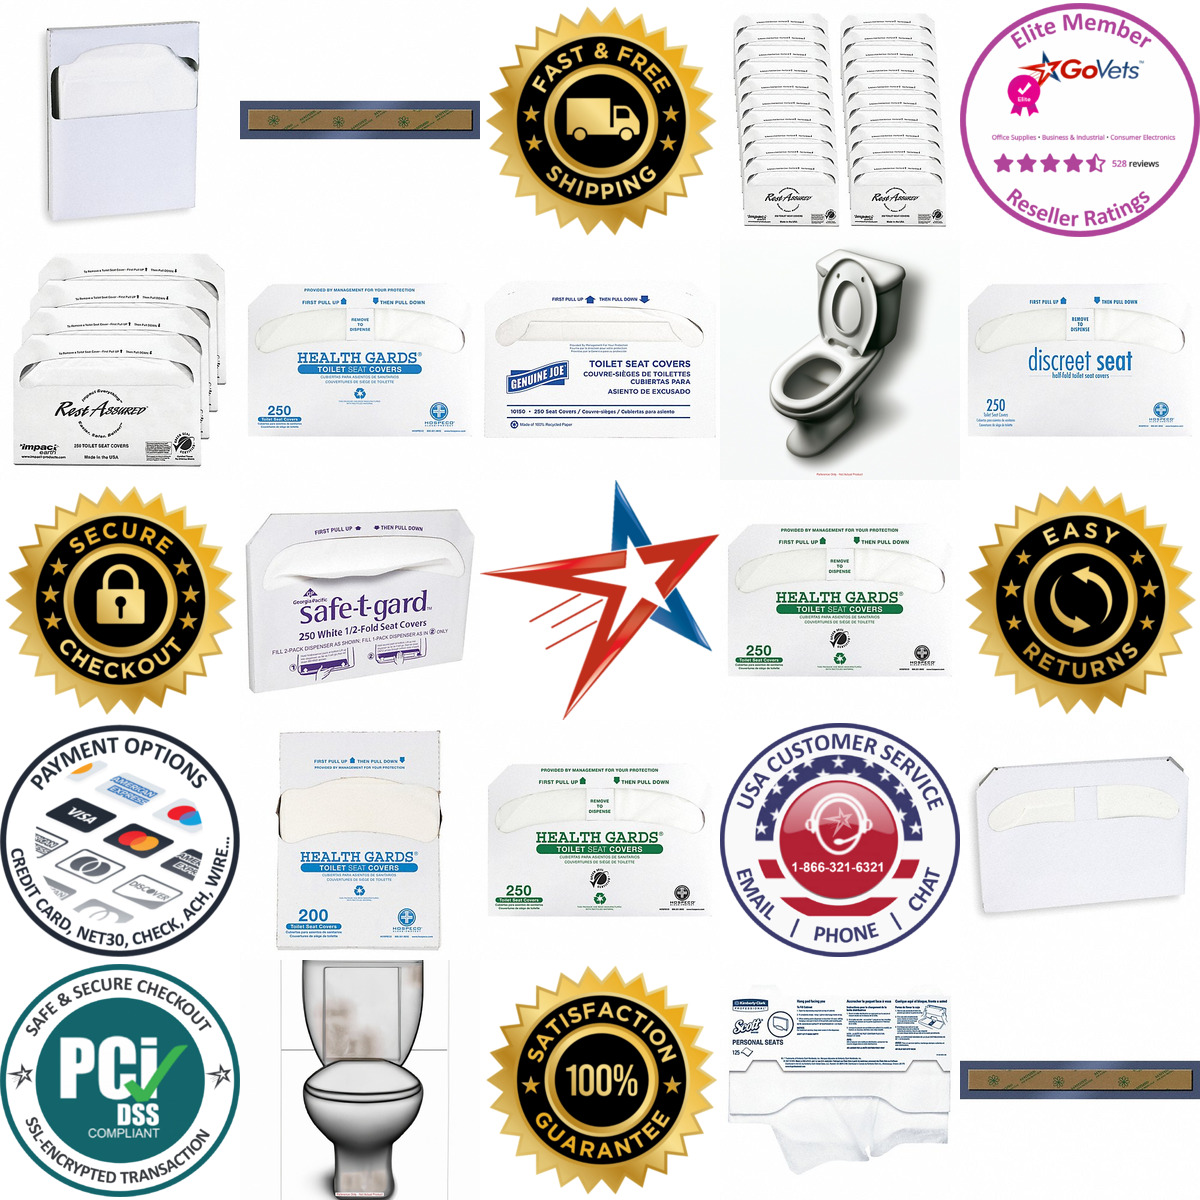 A selection of Toilet Seat Covers products on GoVets